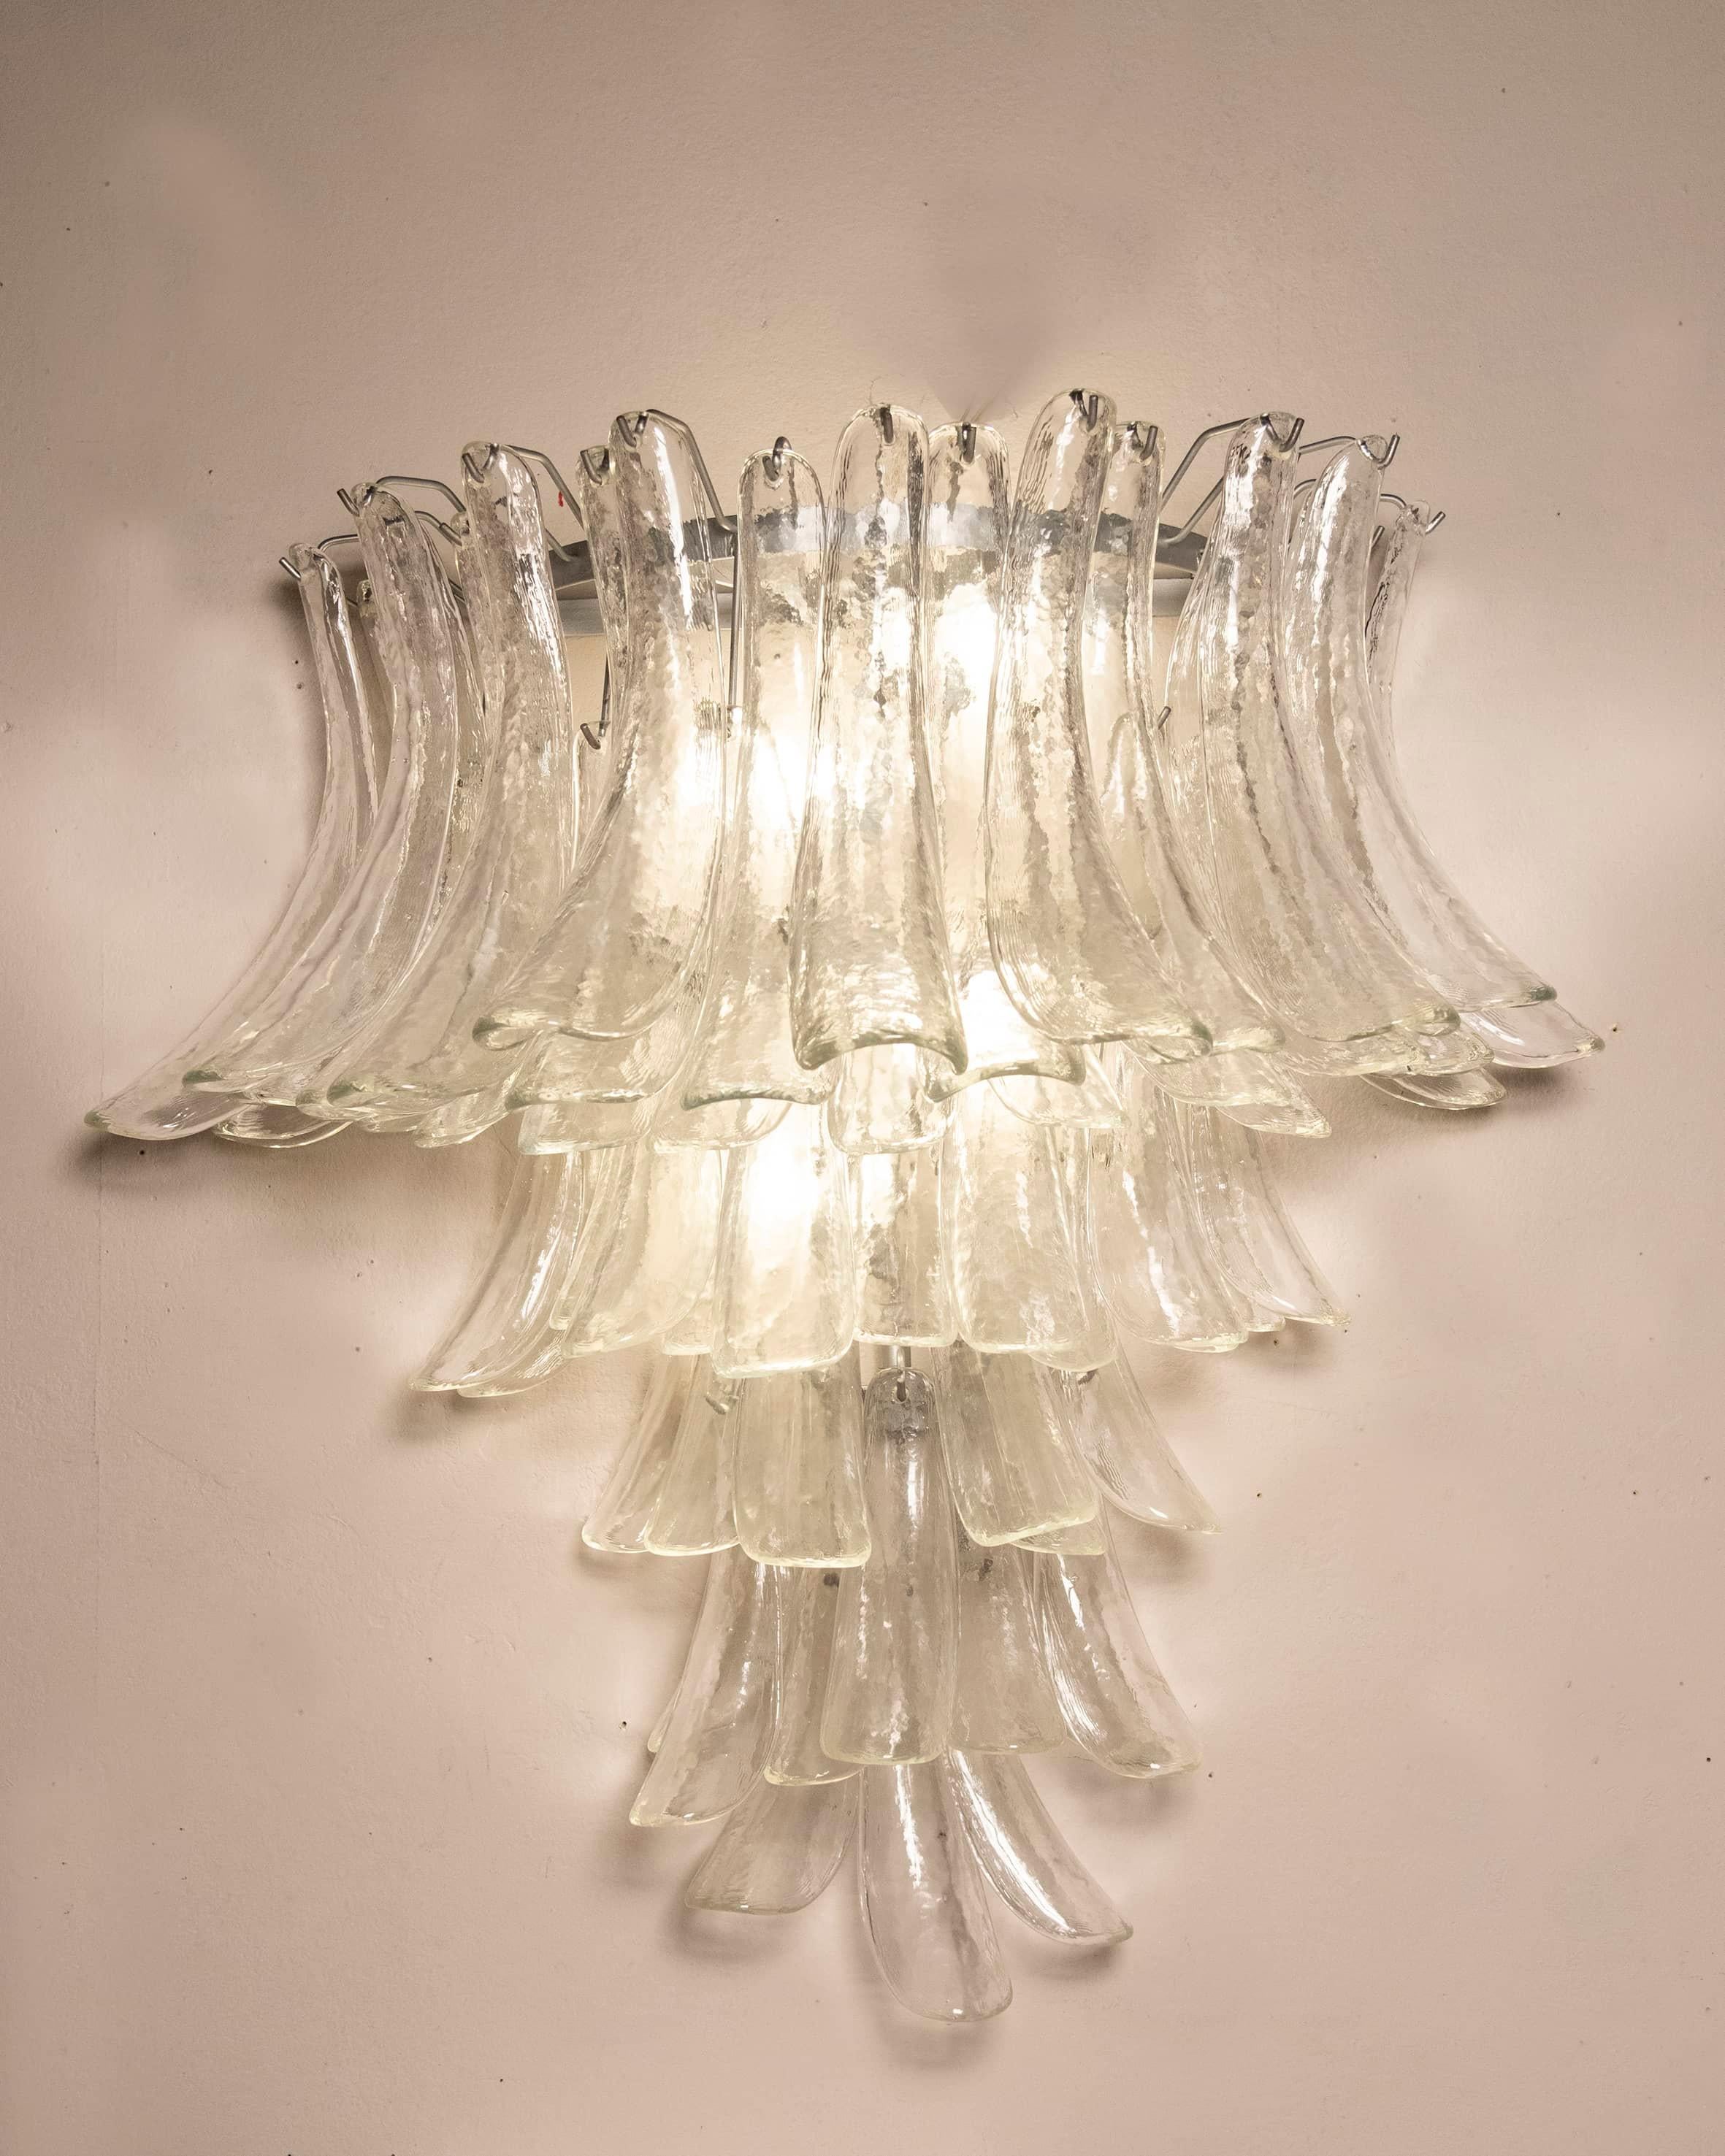 Wall sconce / wall lamp formed by several glass petal, particular for their thickness, by Venini. 
Object from the 1970s in perfect condition. 
Measurements W95 D 50 H 90 CM.
Also available a wall sconce with the same characteristics but smaller.